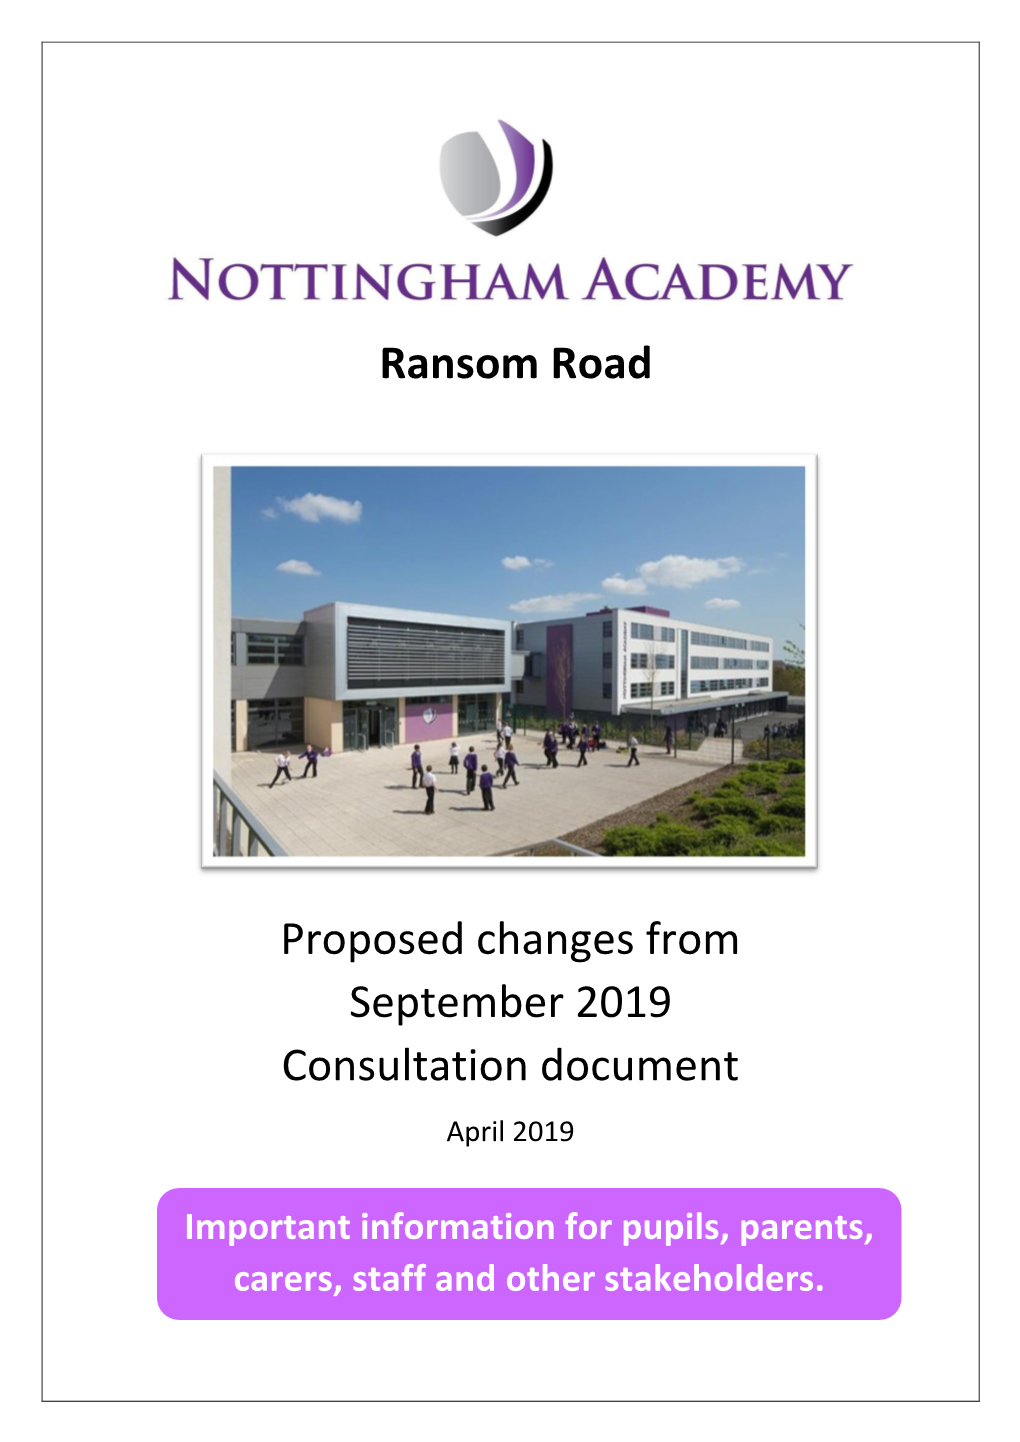 Ransom Road Proposed Changes from September 2019 Consultation